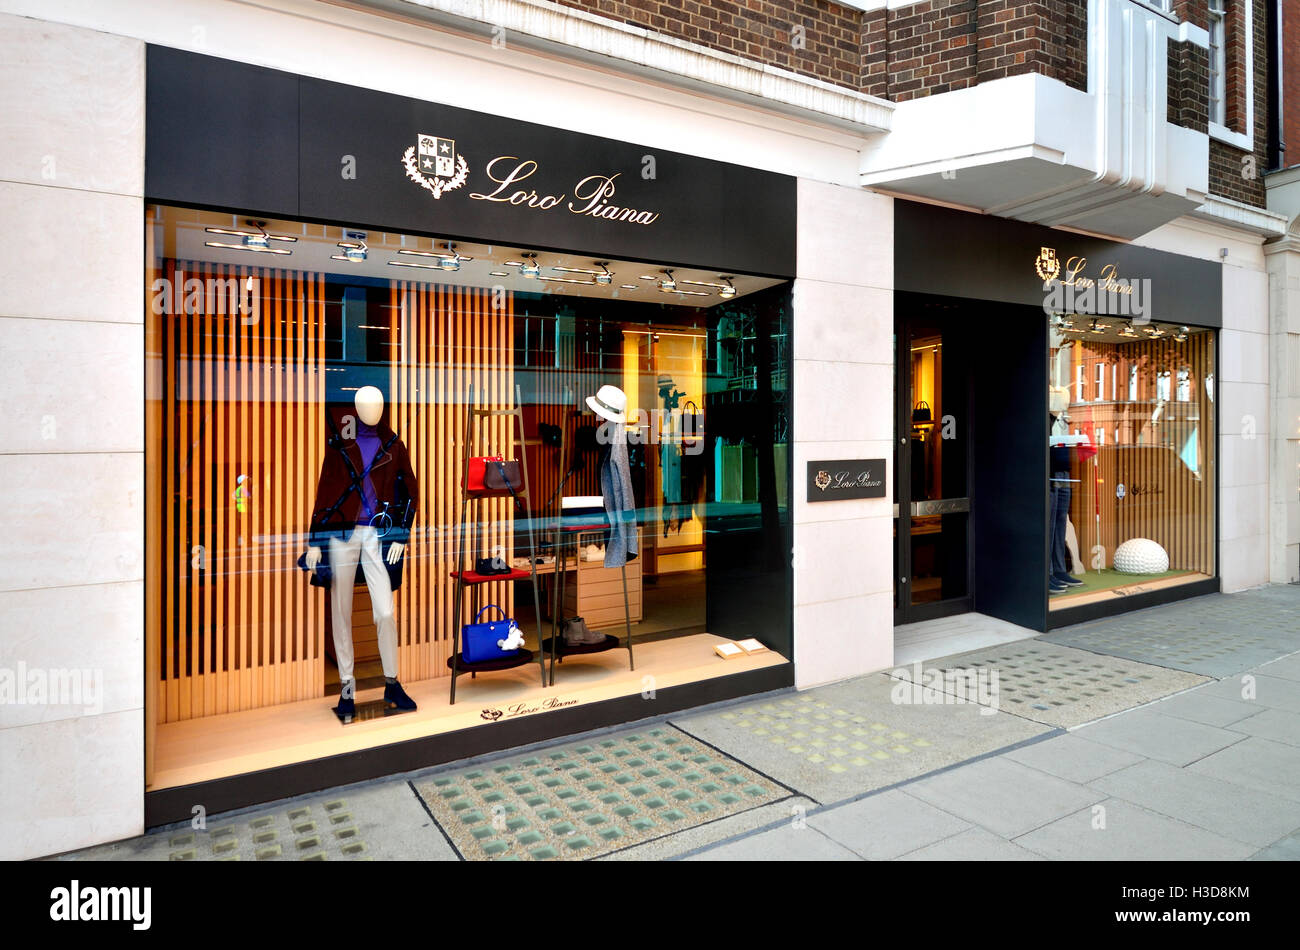 Loro piana hi-res stock photography and images - Alamy